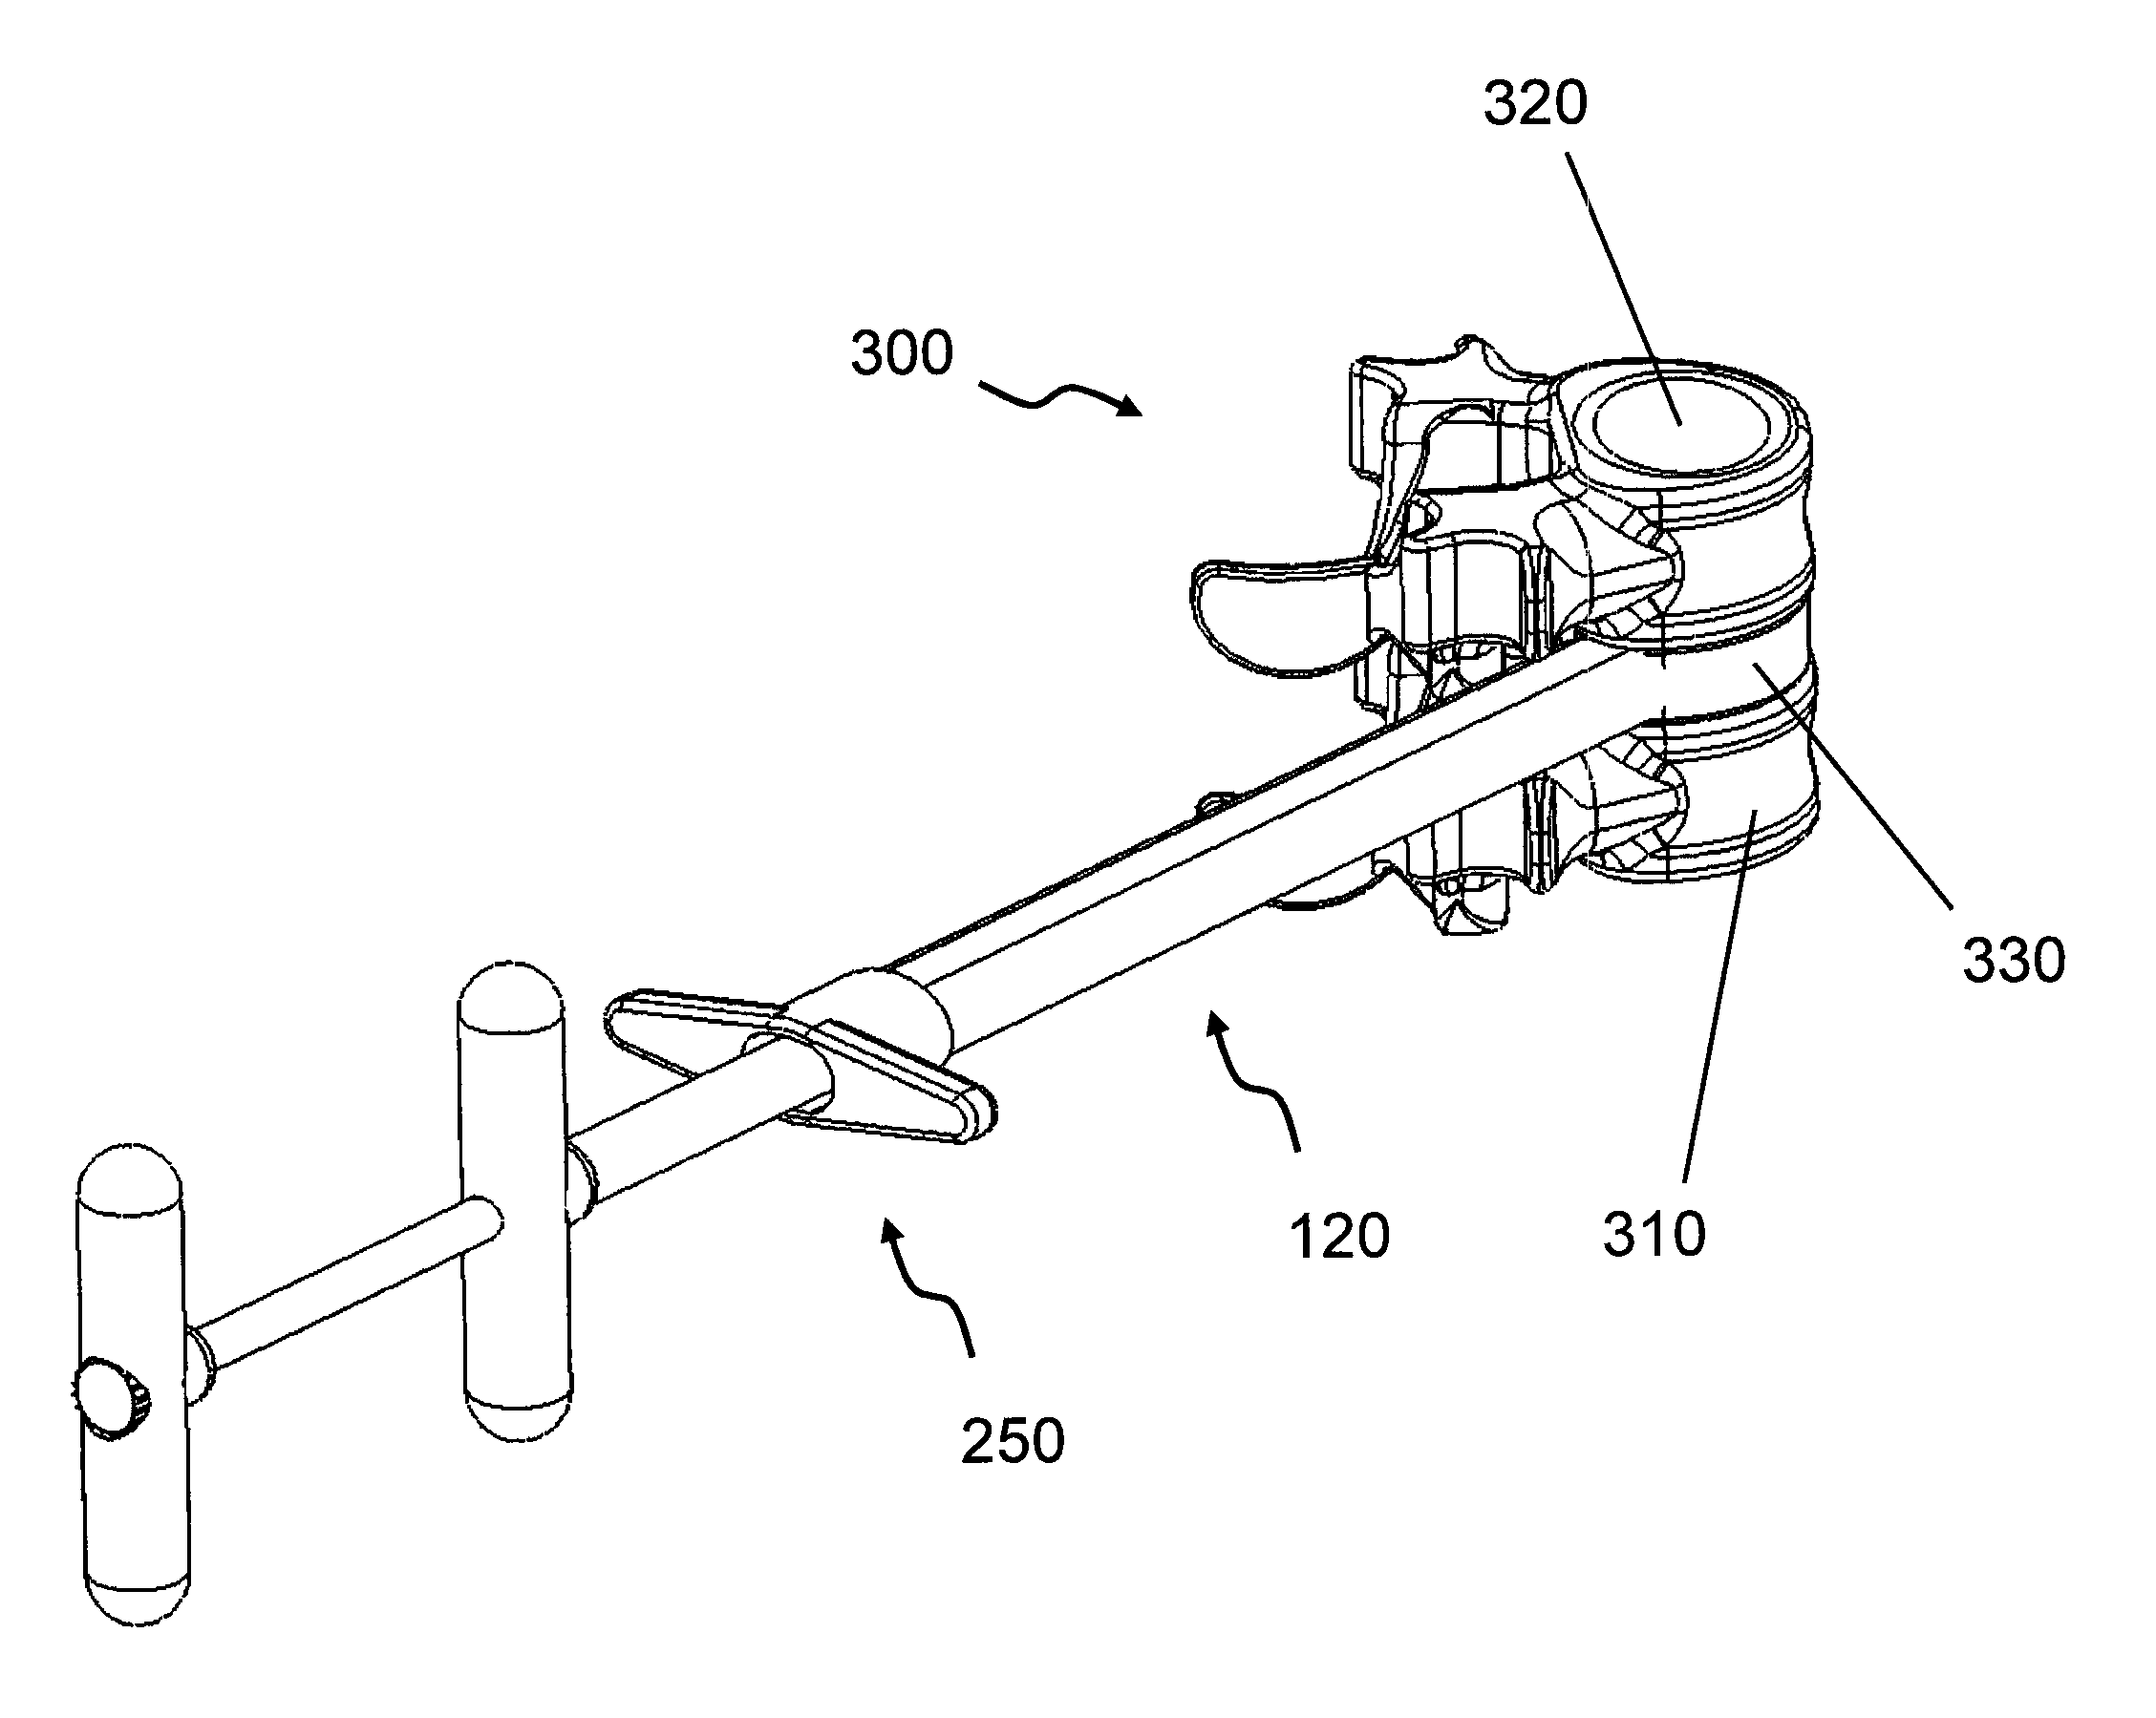 Percutaneous interbody spine fusion devices, nuclear support device, spine fracture support device, delivery tools, percutaneous off-angle bone stapling/nailing fixation device and methods of use